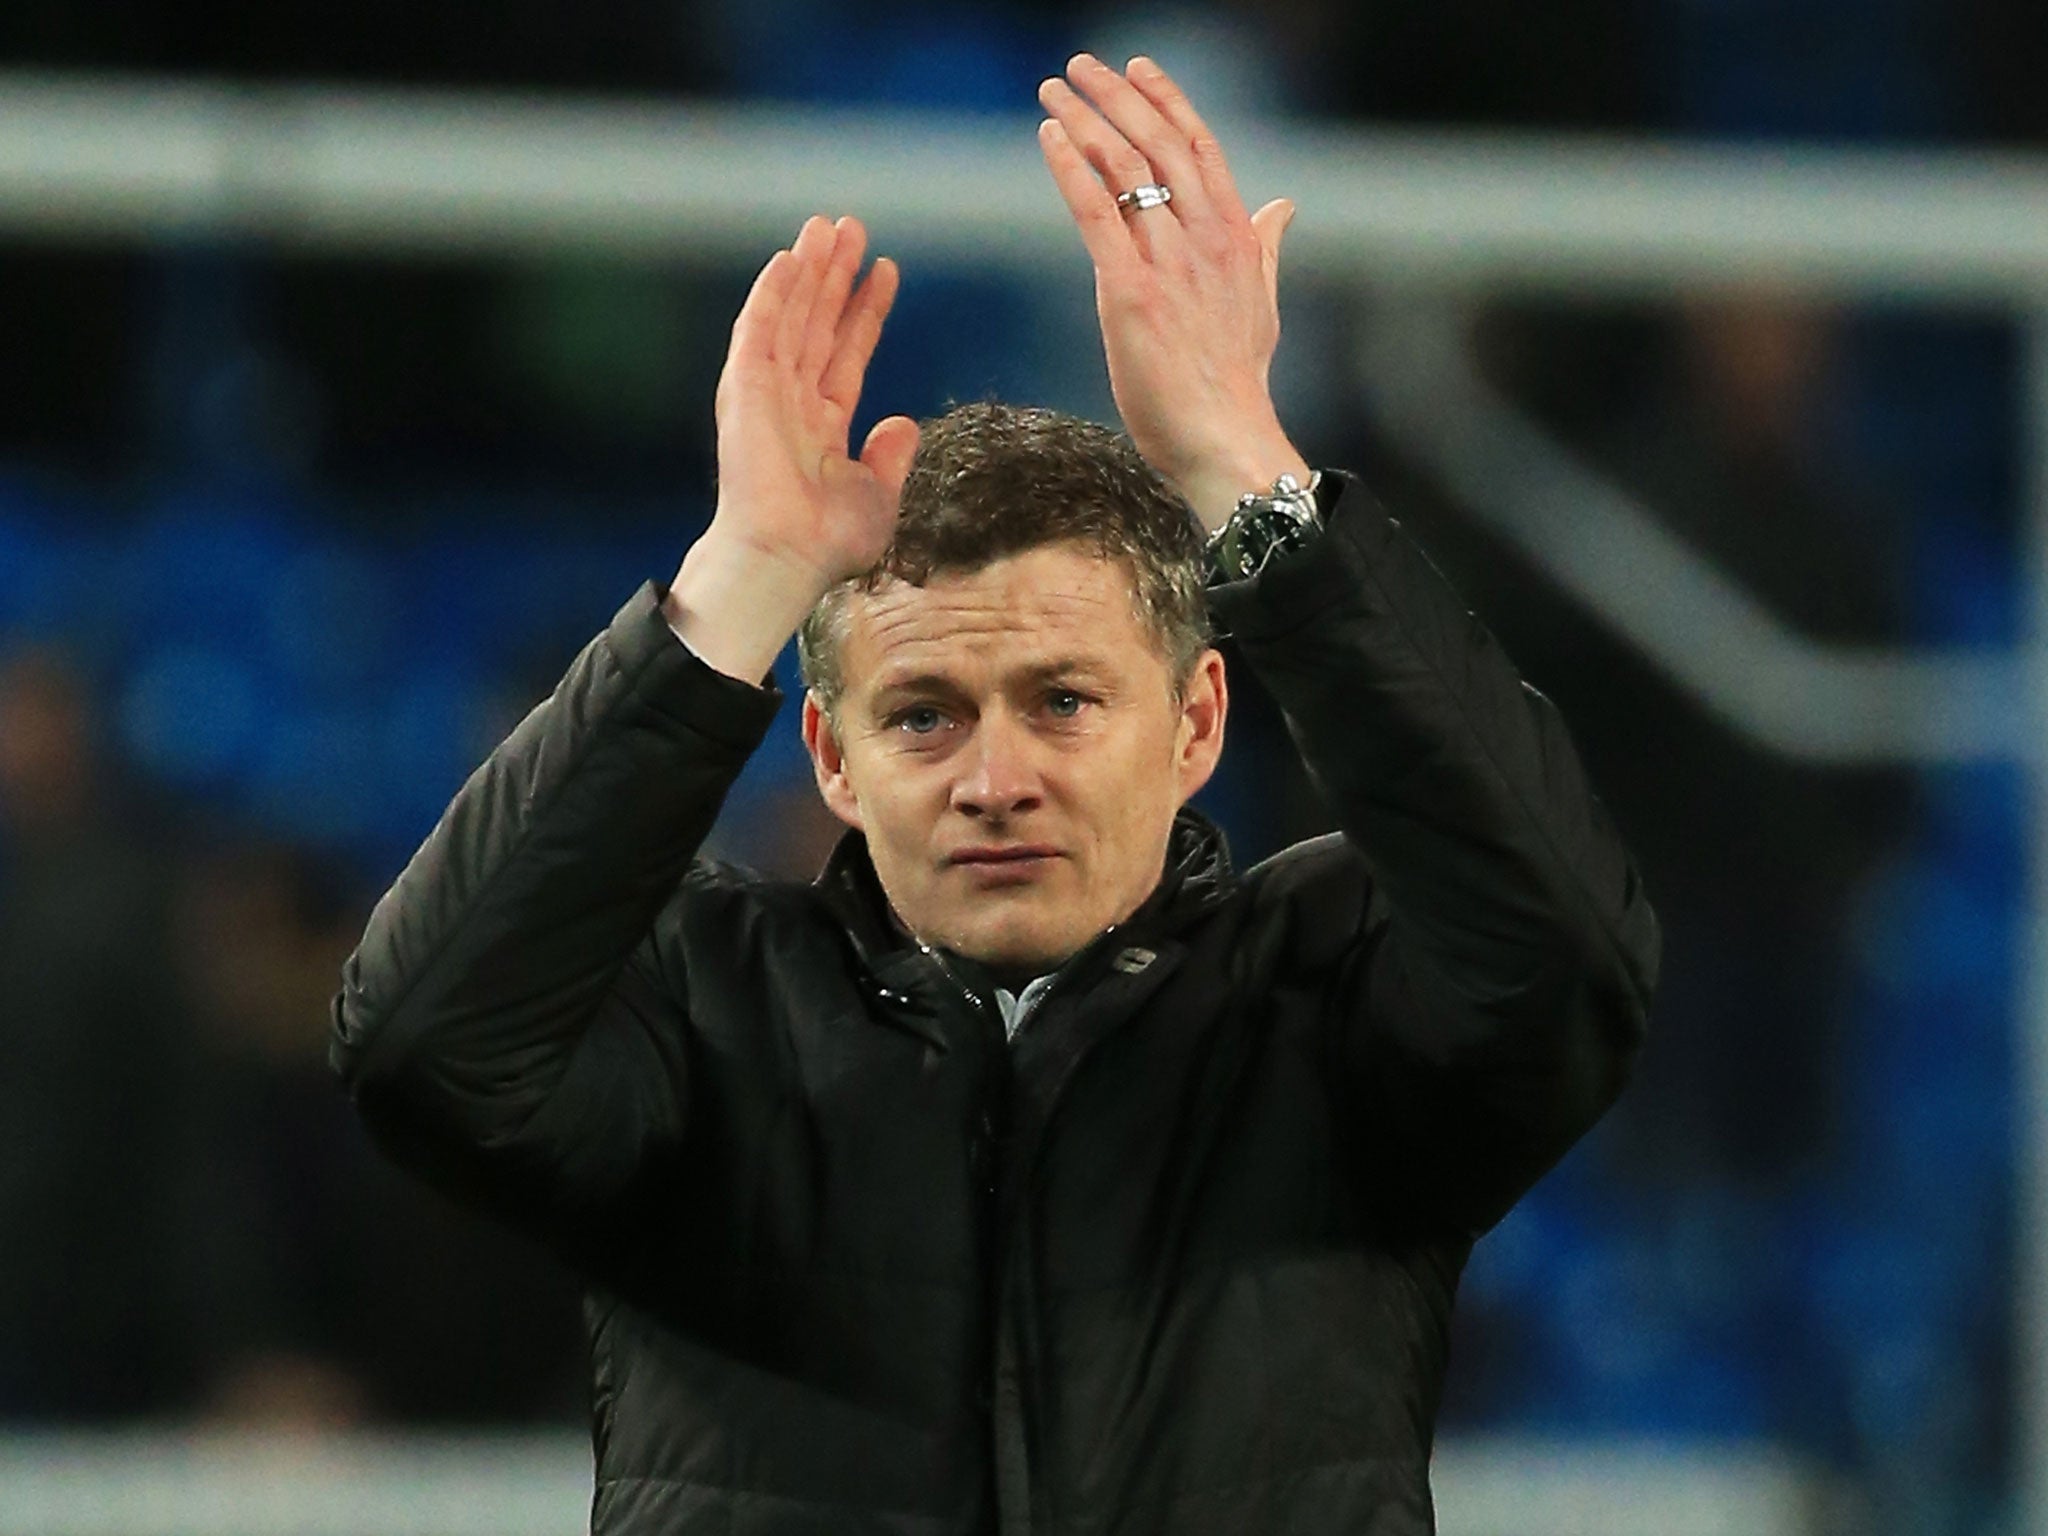 Ole Gunnar Solskjaer is looking forward to facing his former side Manchester United